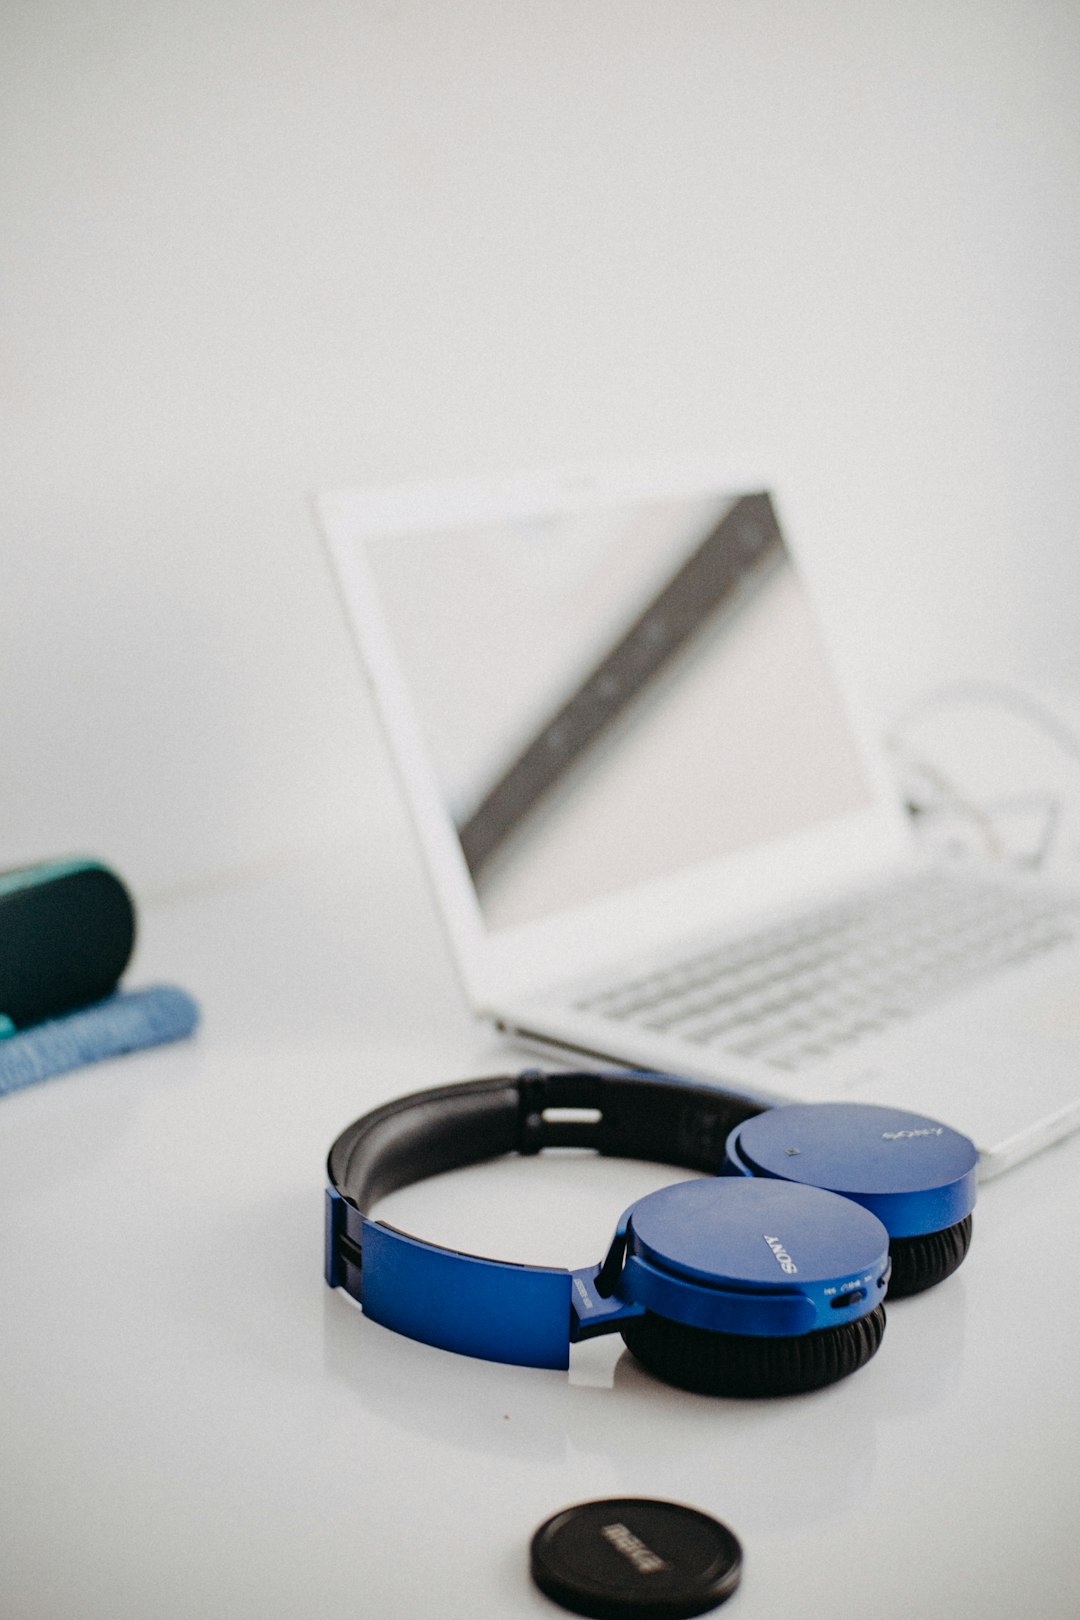 black and blue headphones beside white tablet computer